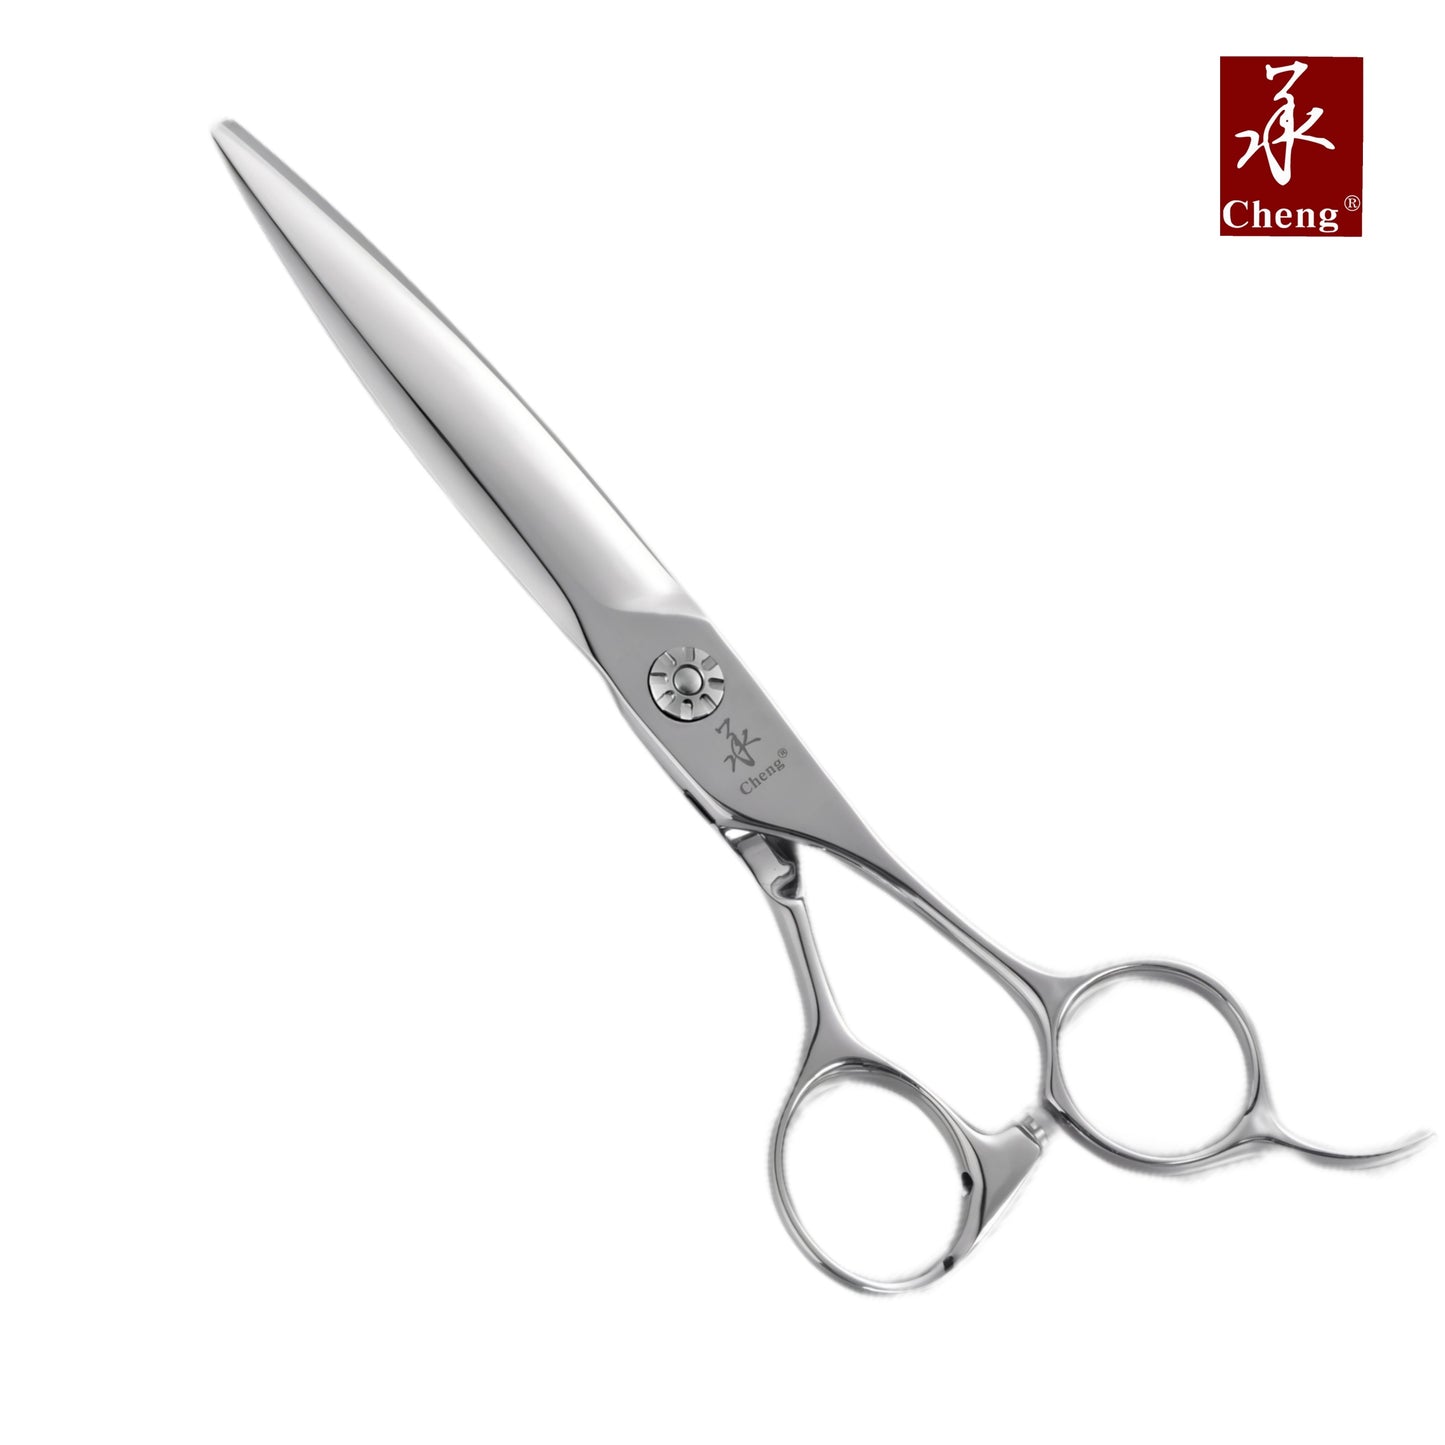 BF-635C 6.0 Inch 35T Hair Thining Shears Salon Shears Scissors About=35%